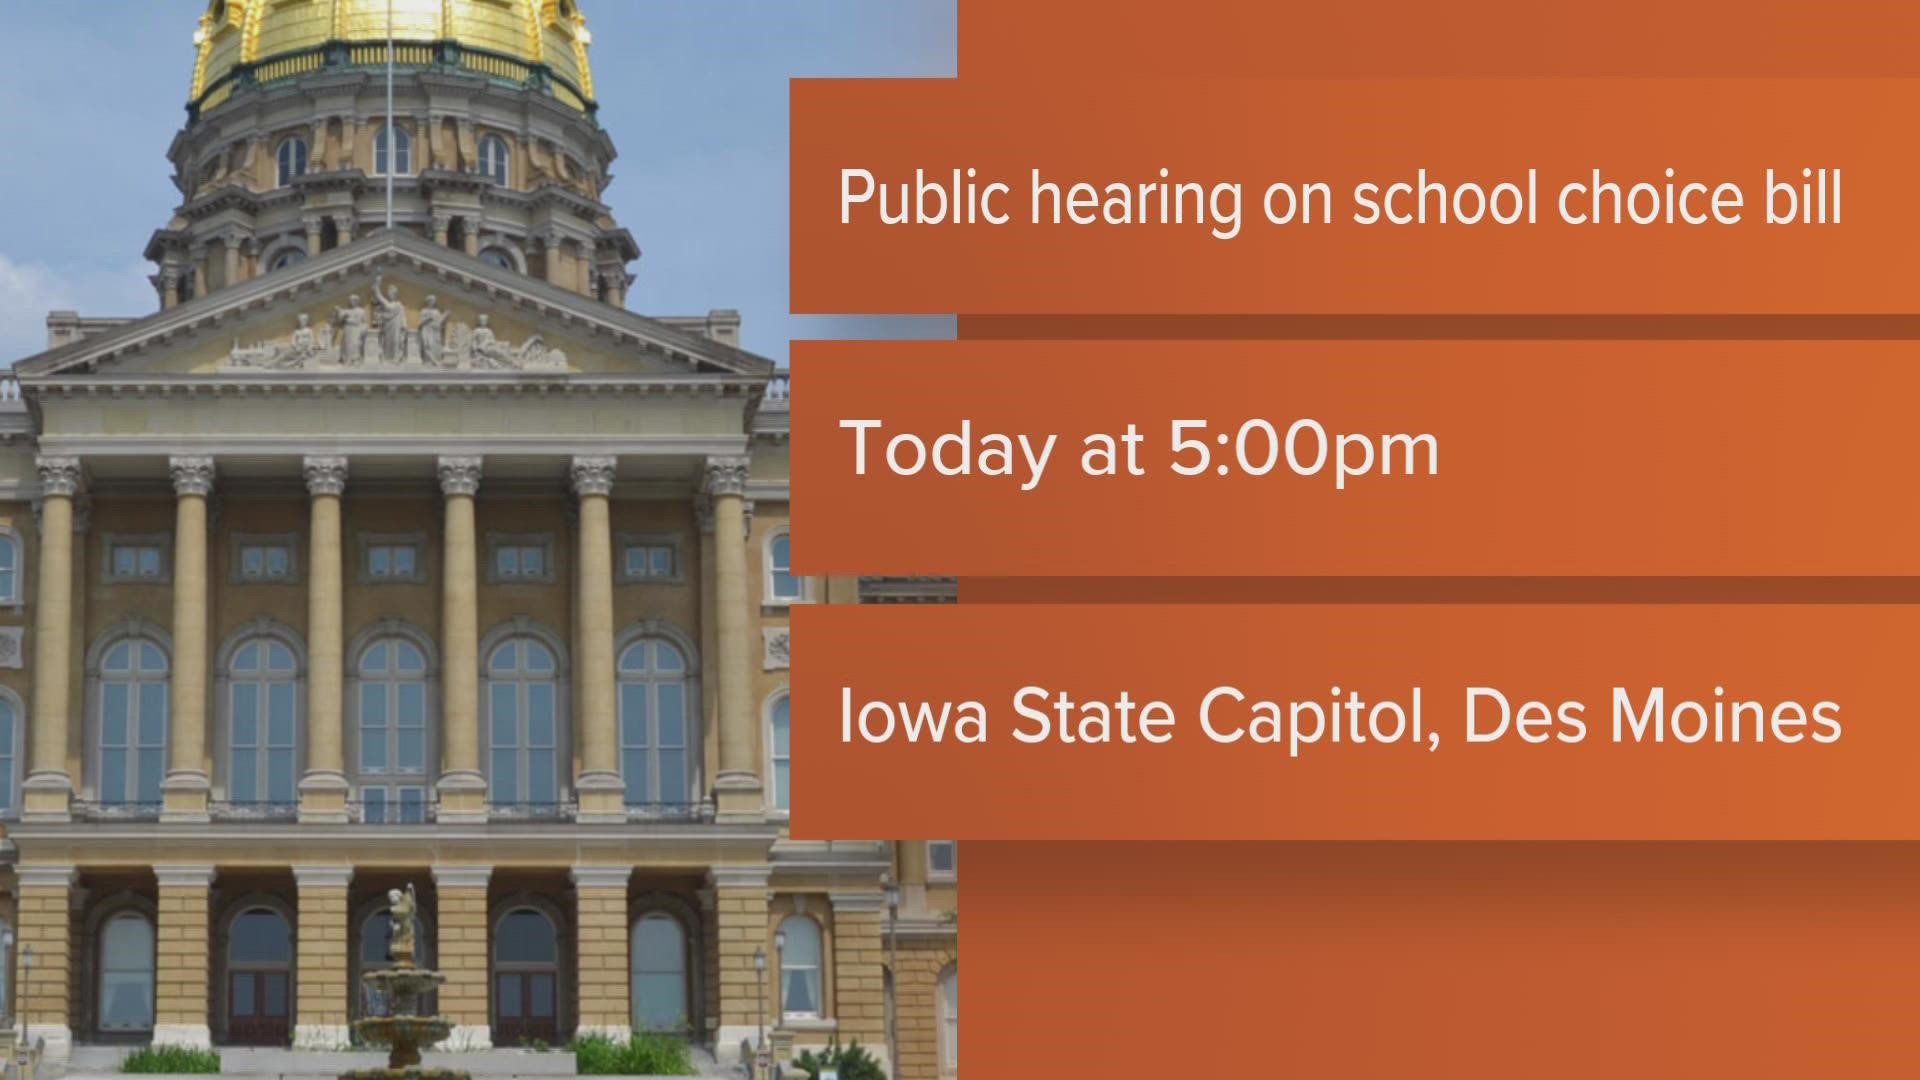 The hearing will discuss the school choice plan that Gov. Reynolds outlined in her Condition of the State speech earlier this month.